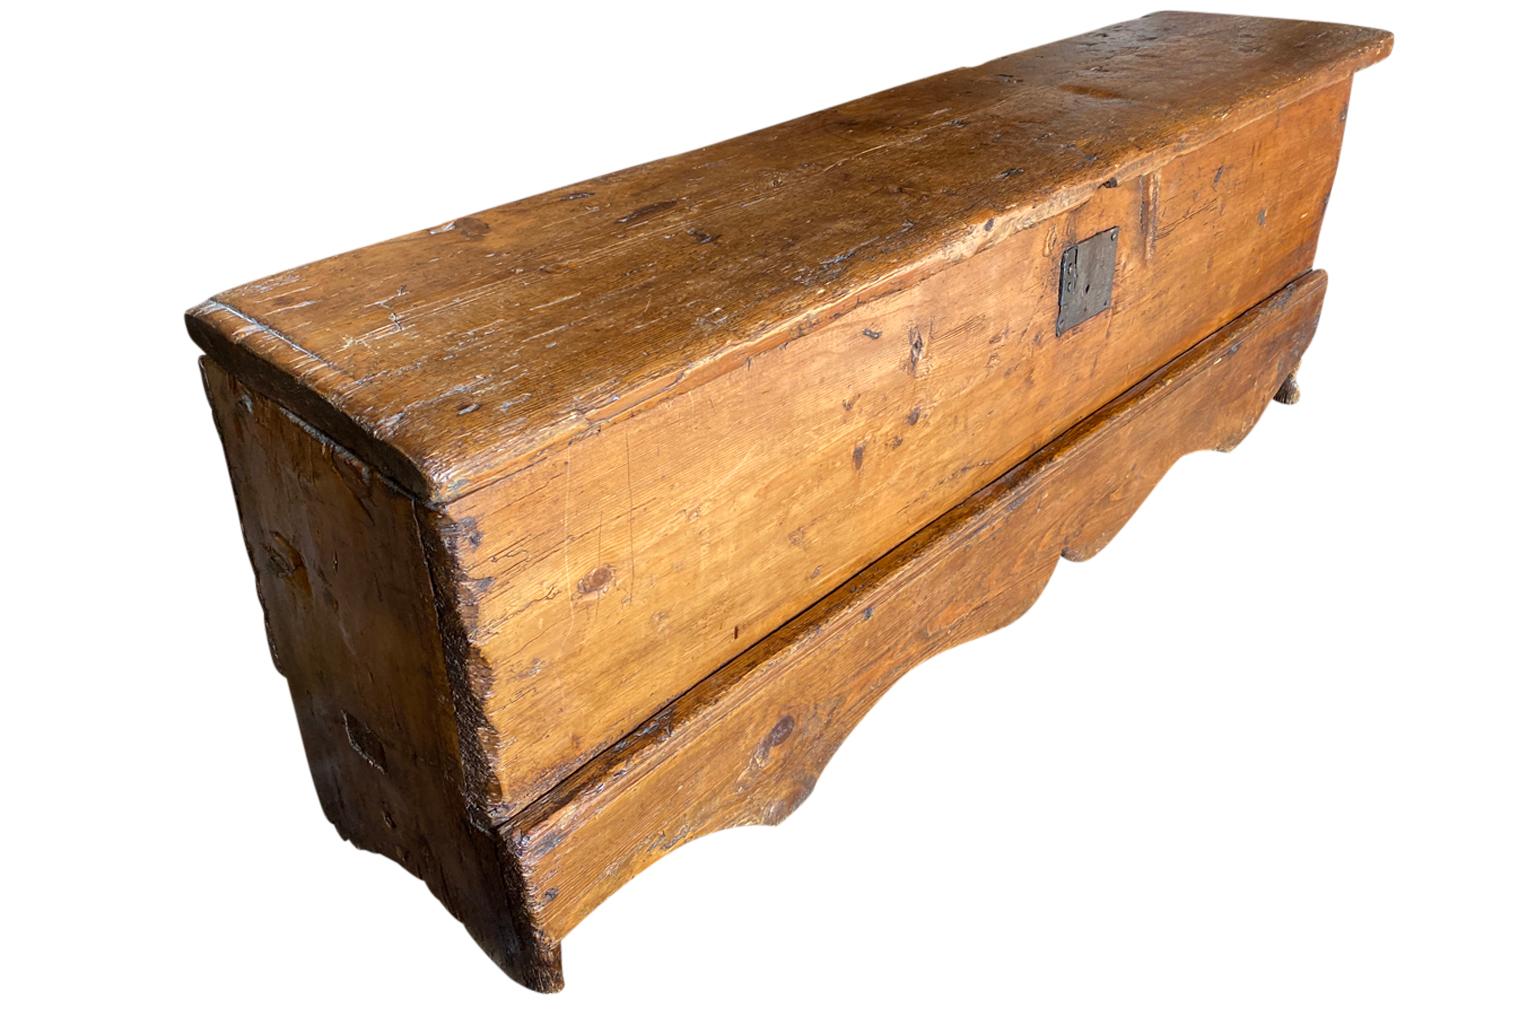 A very handsome 18th century Trunk from the South of France. Soundly constructed from richly stained pine with charming scalloped shaped apron and an interior storage compartment. Beautiful at the base of a bed or under a picture window. Lovely